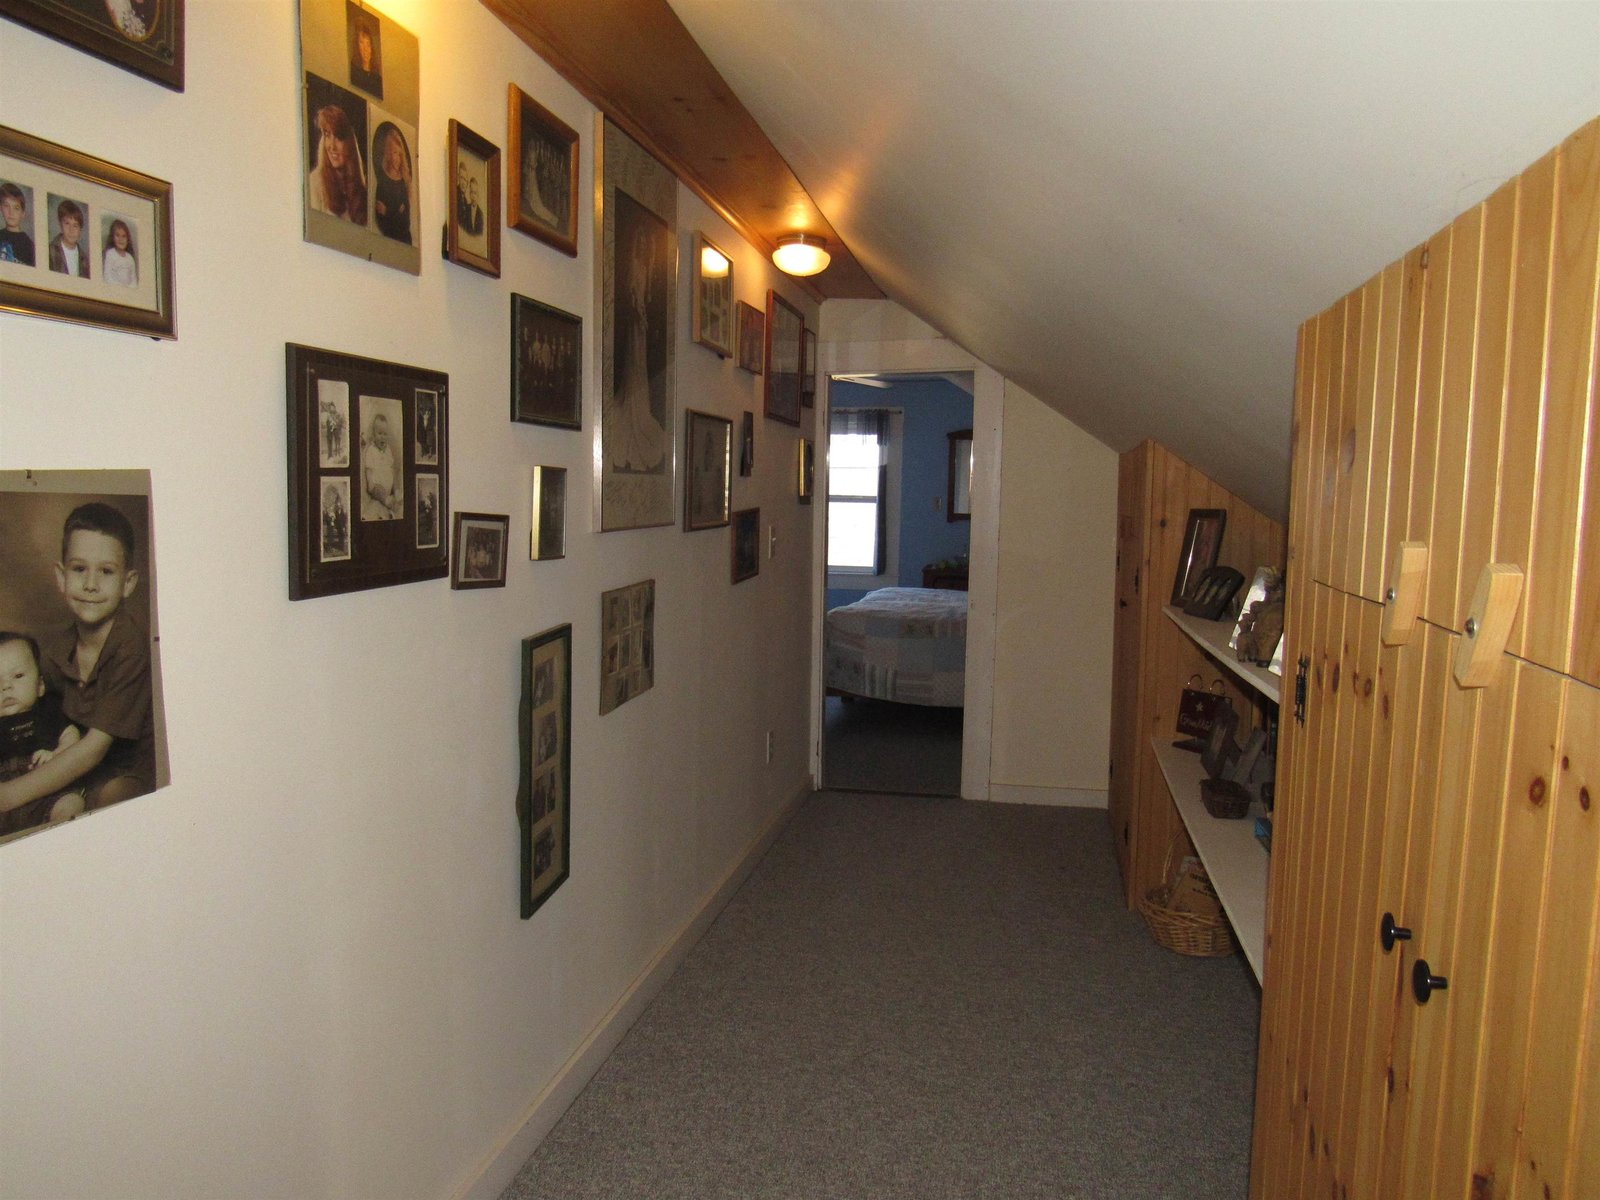 Storage along the connecting hallway